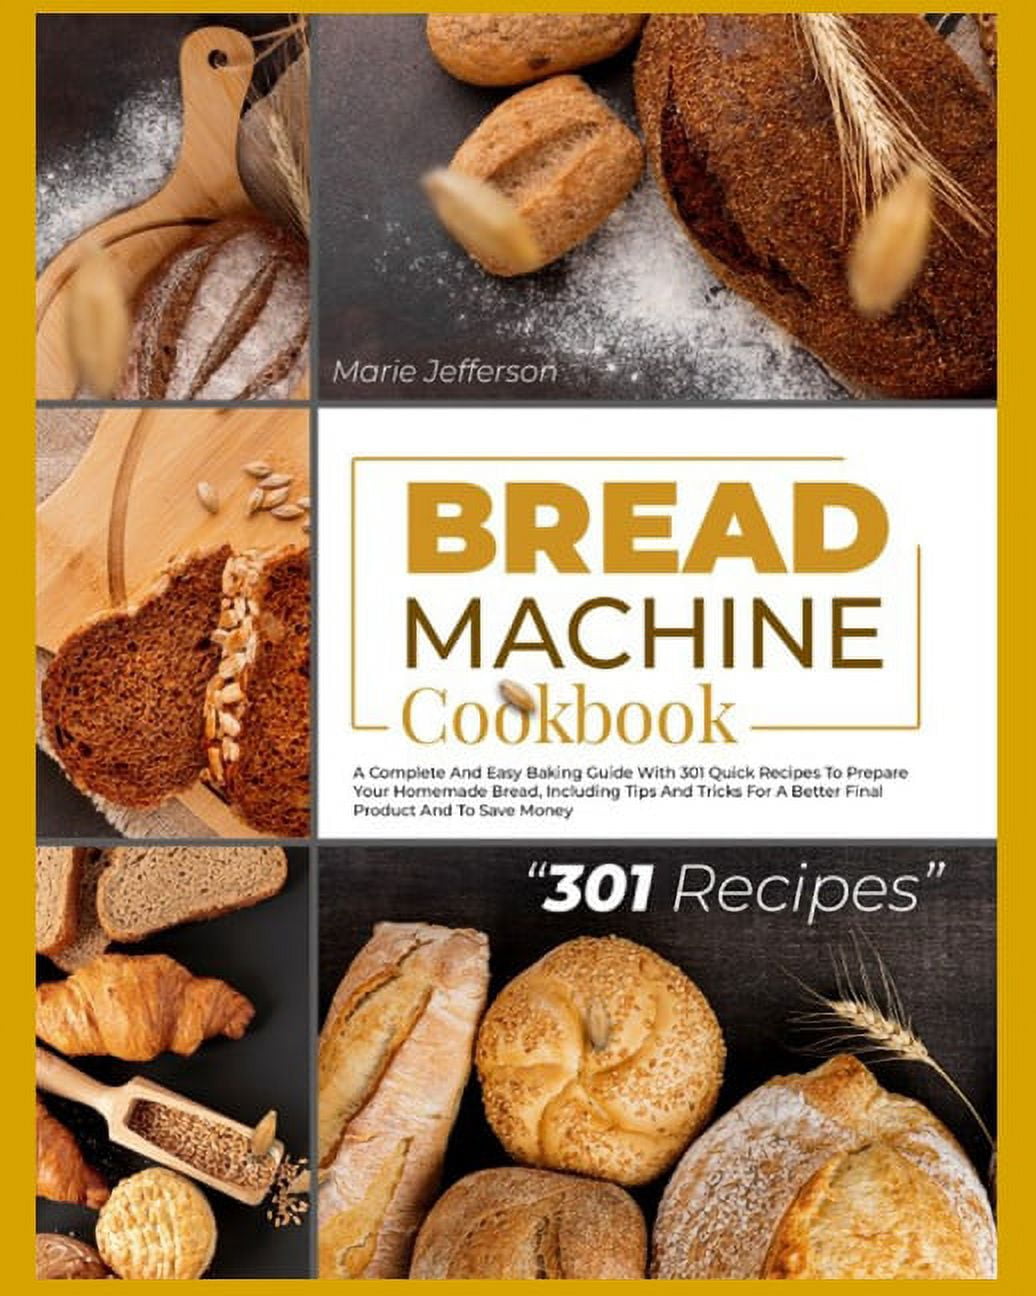 Save Money with a Bread Machine